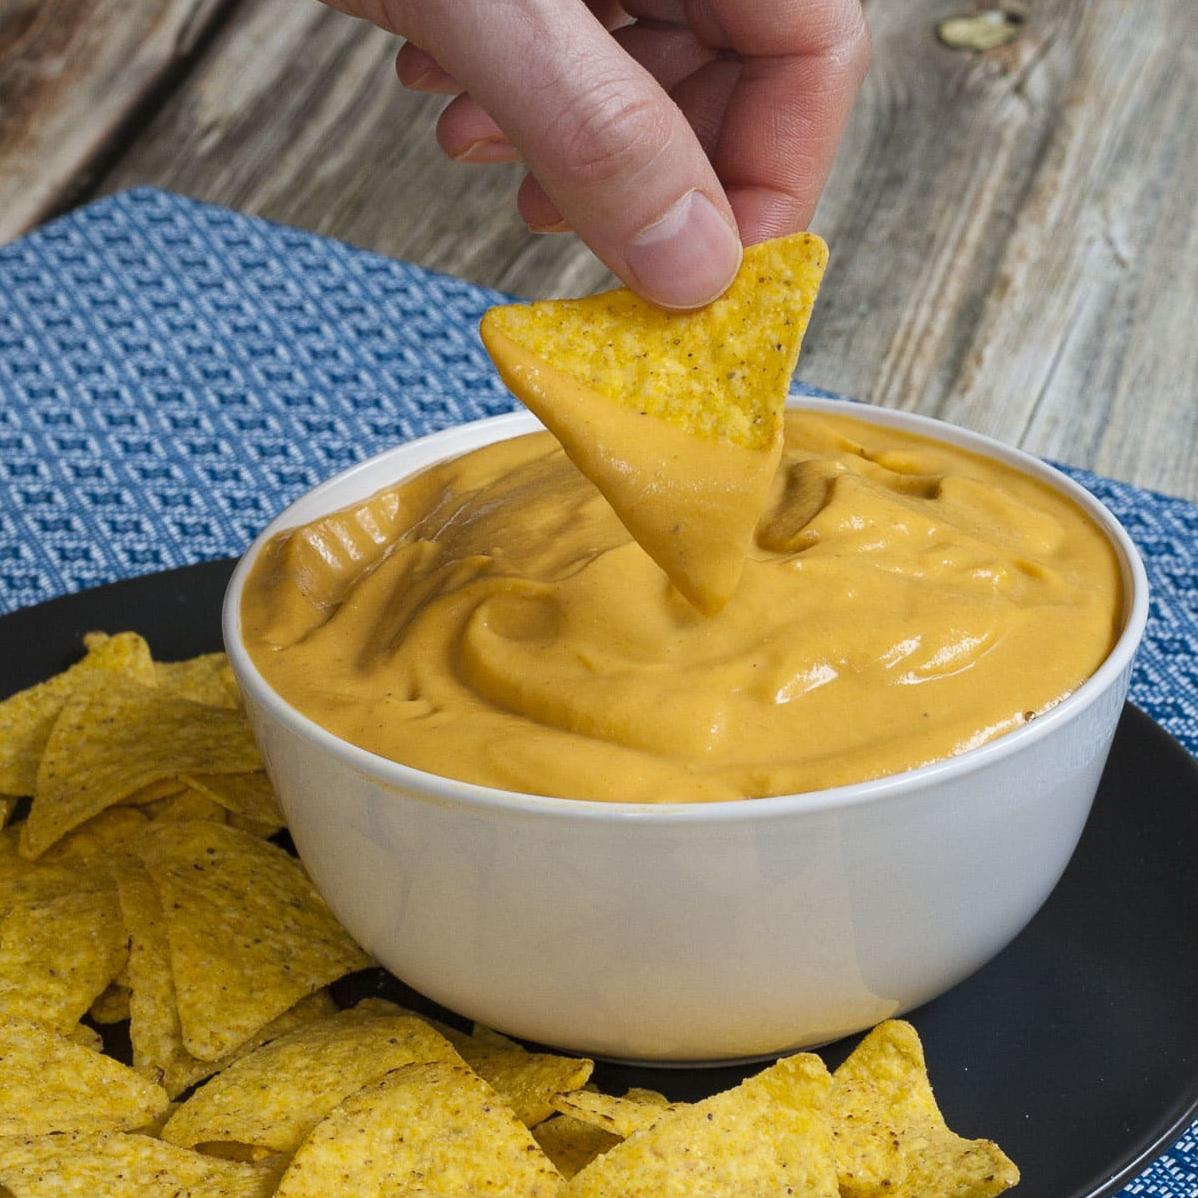  Pair this vegan cheese sauce with your favorite taco recipe for a winning combination.